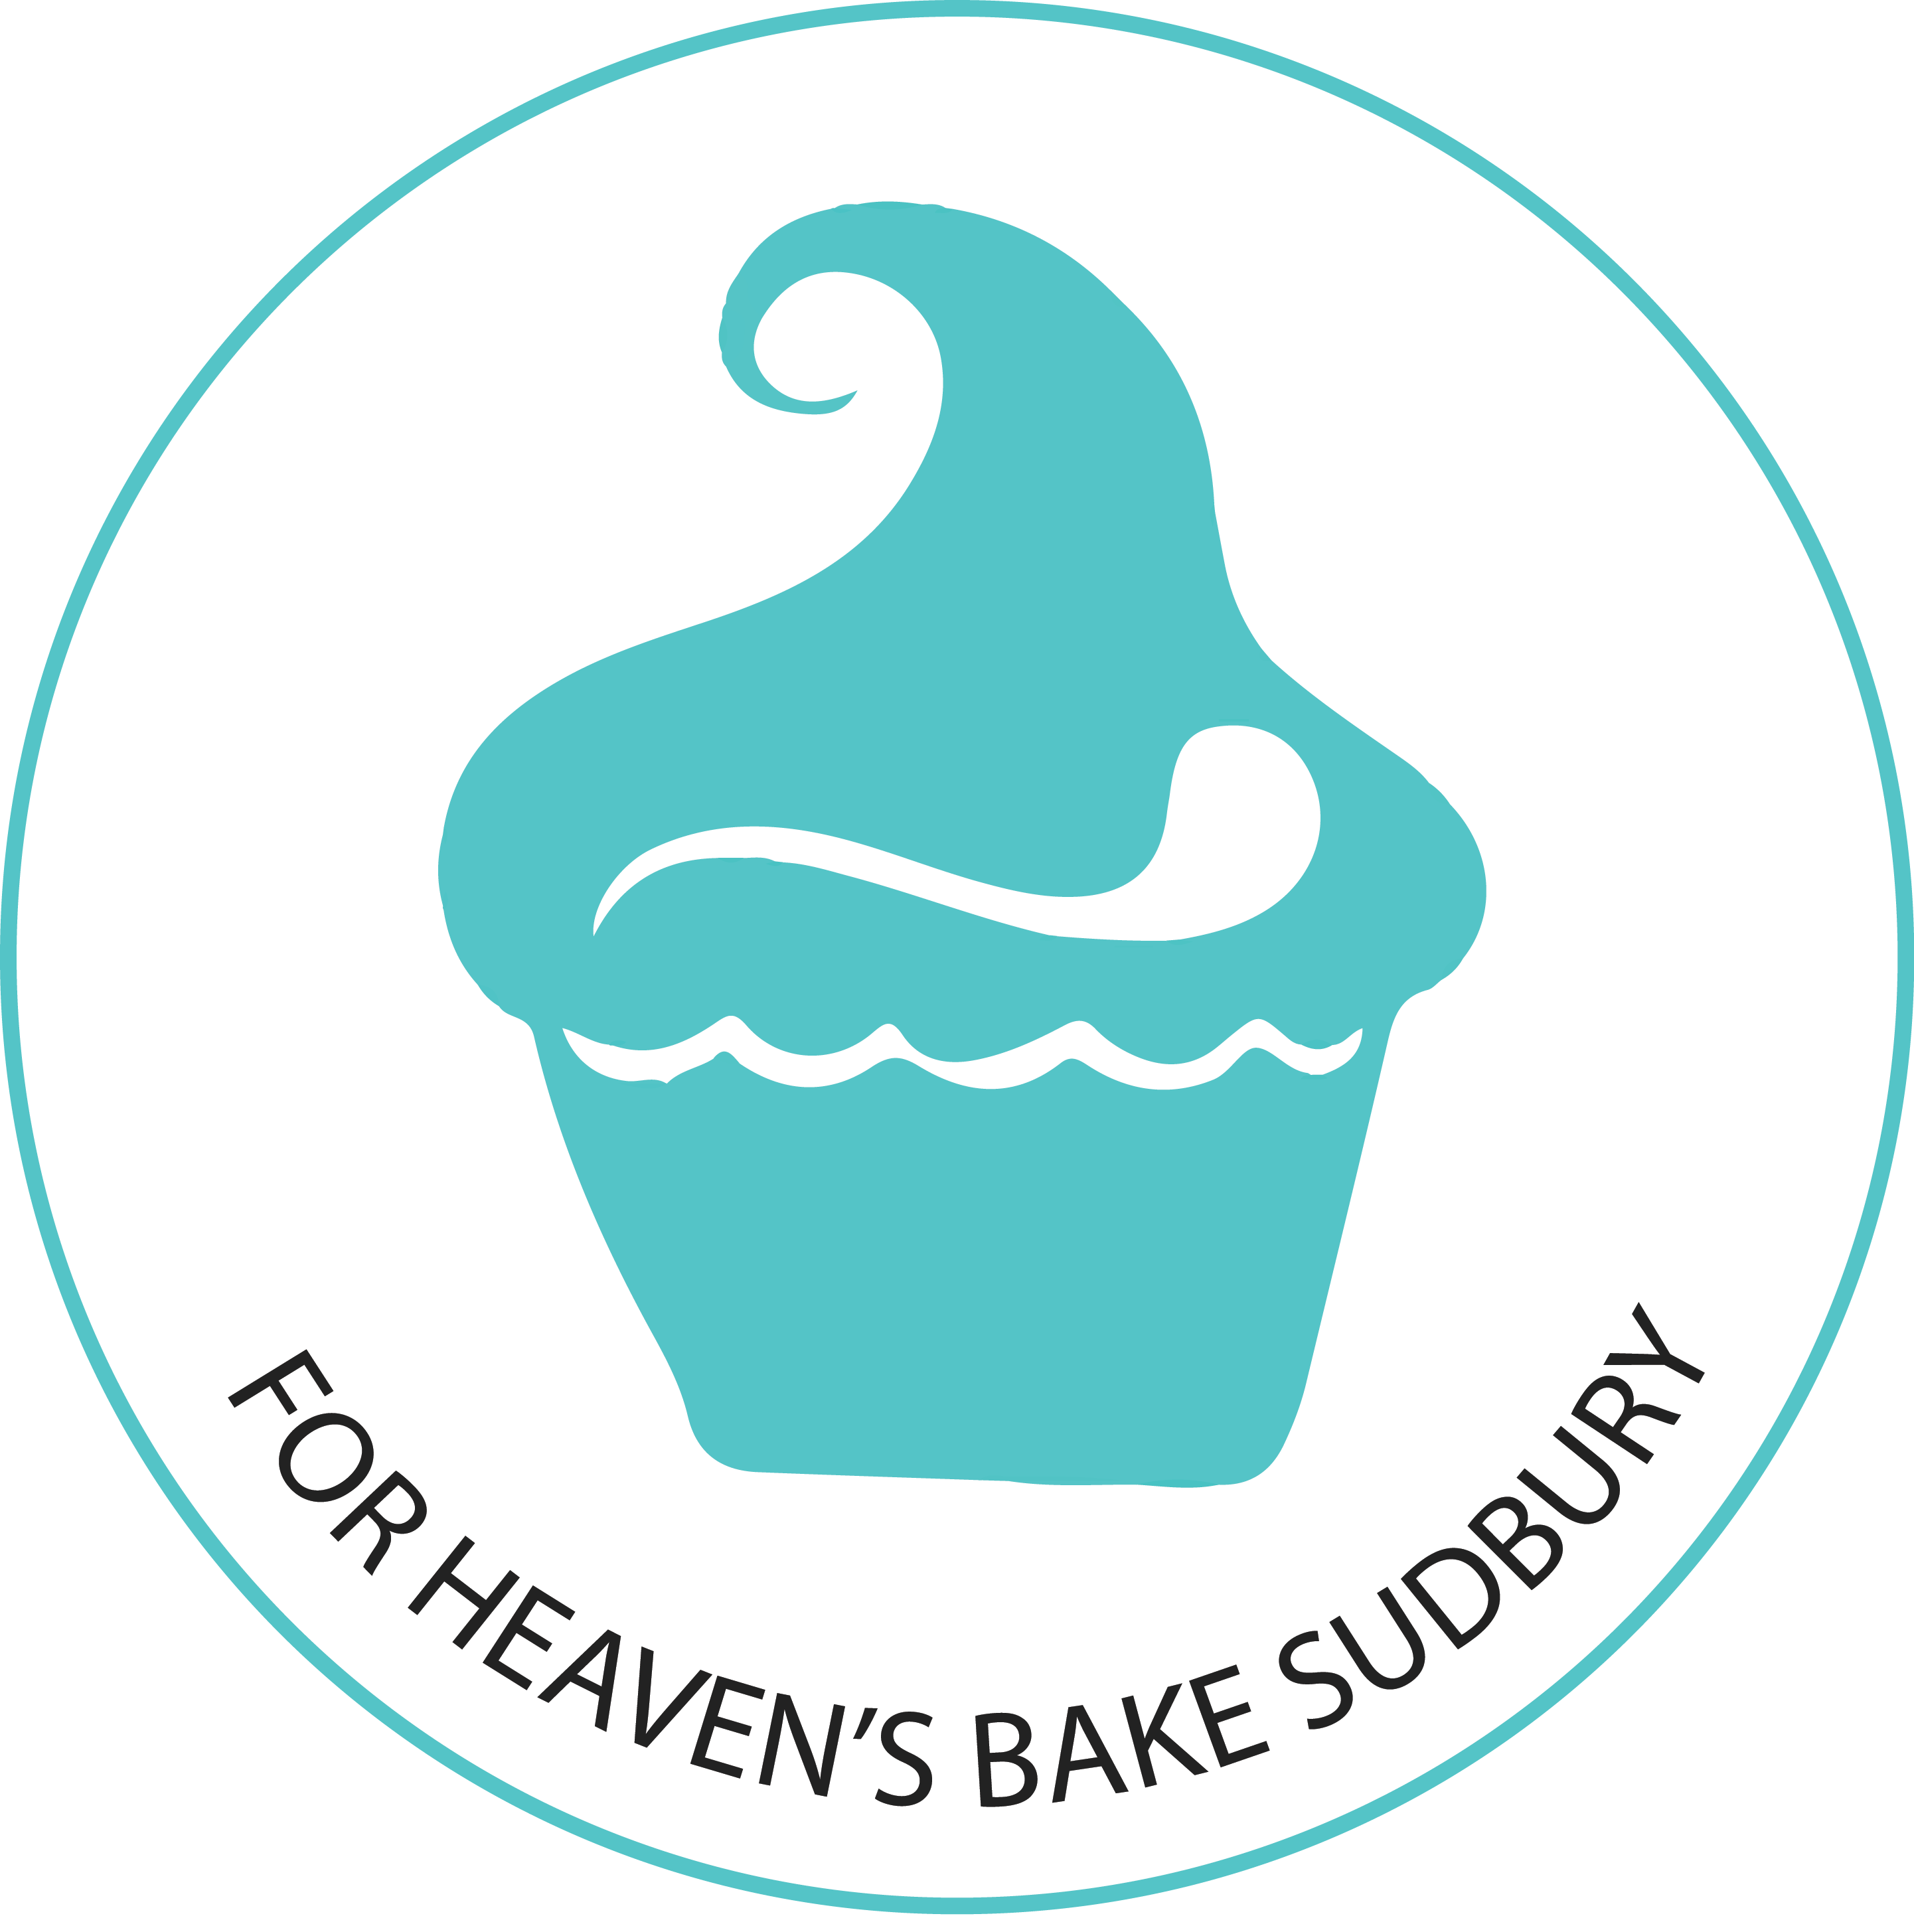 12 Days of Giveaways: For Heaven's Bake Sudbury